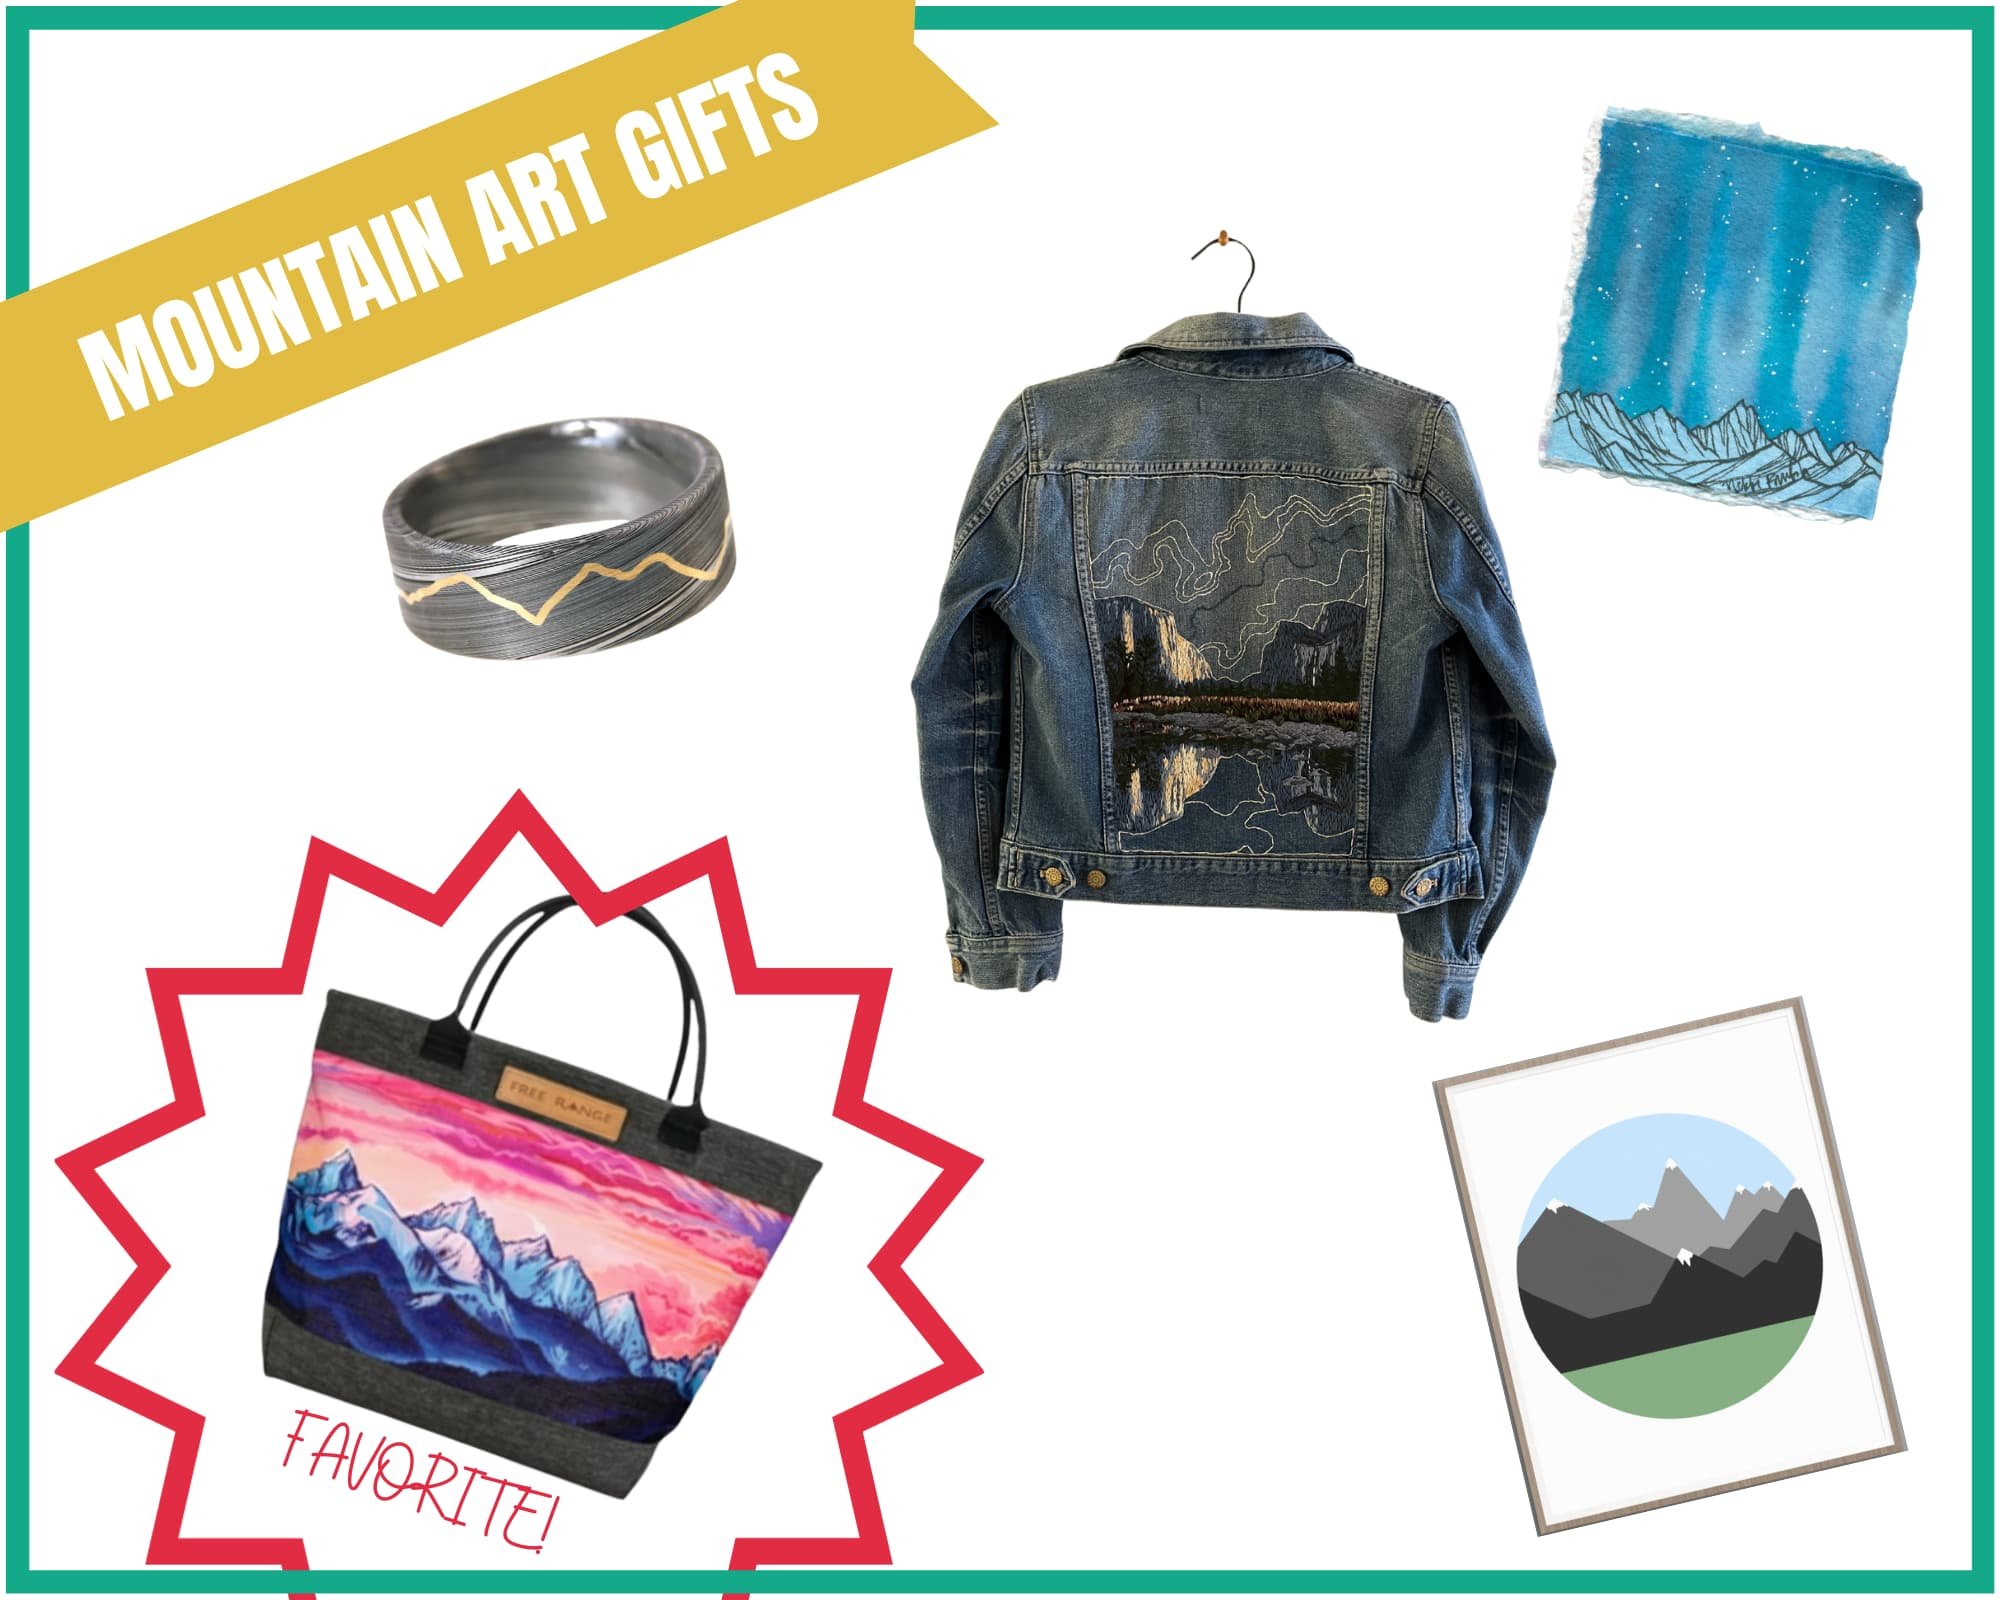 33 Best Gifts for Outdoorsy Men (2024 Gift Guide) — She Dreams Of Alpine